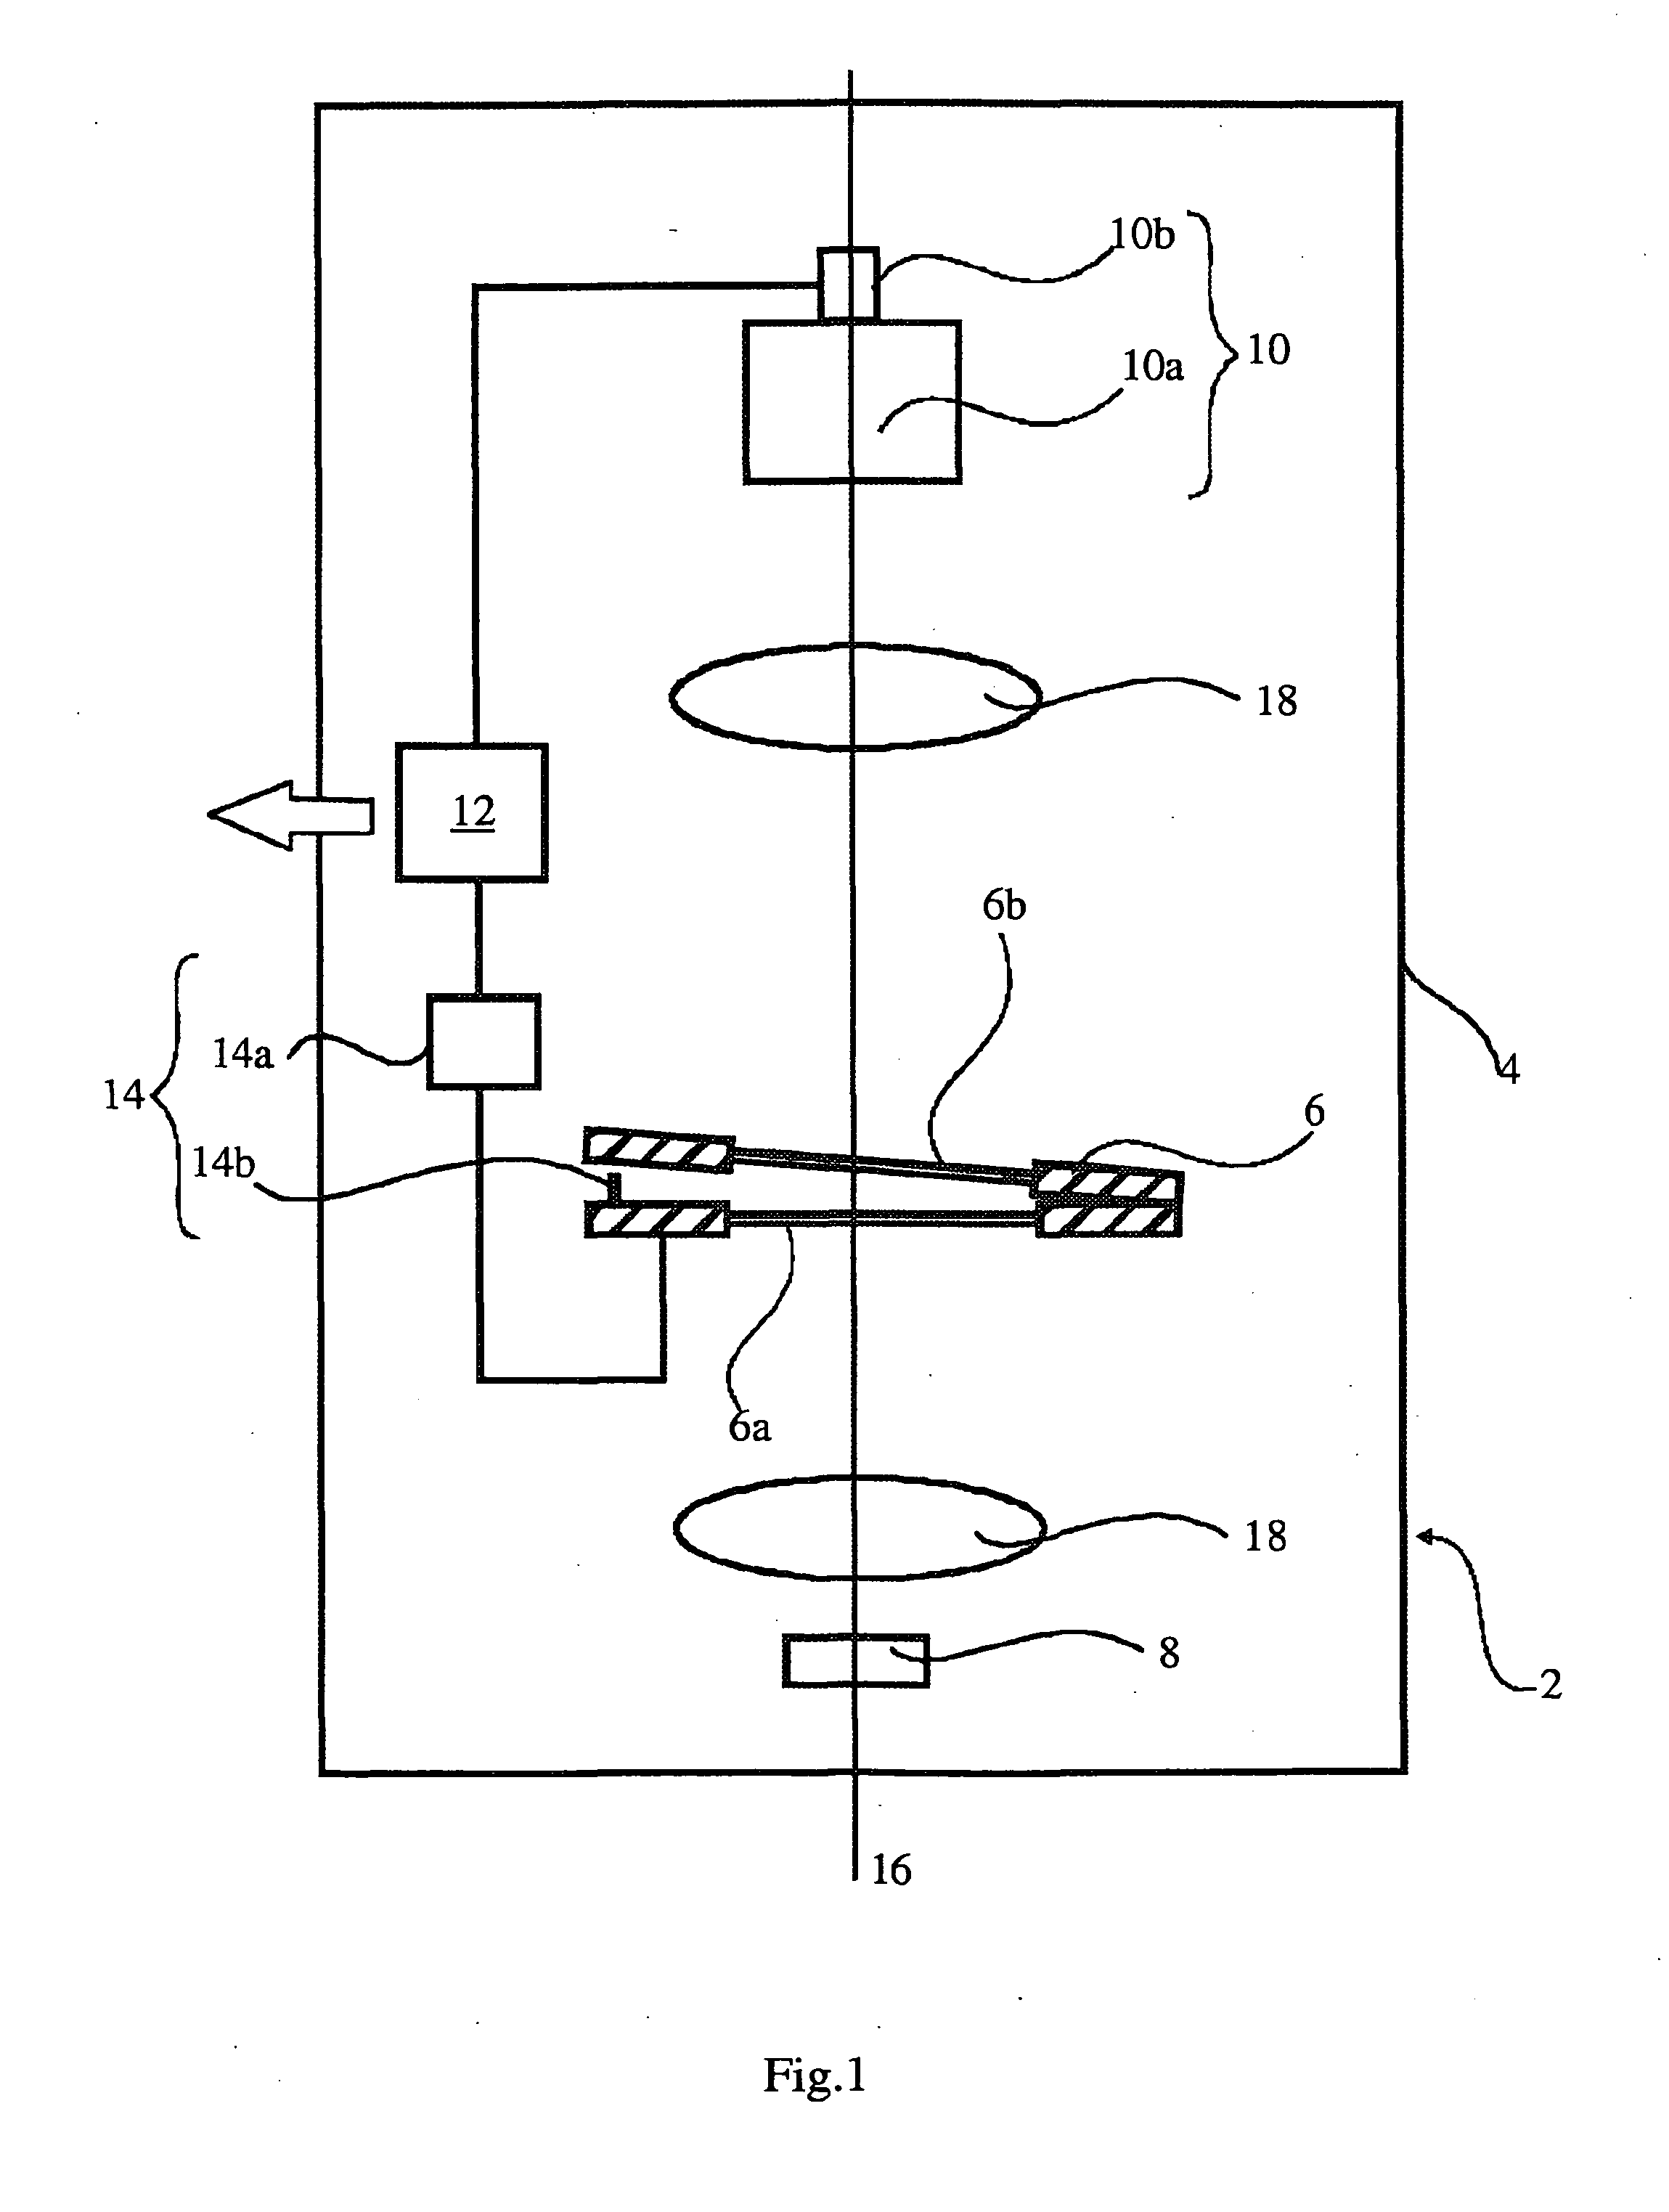 Apparatus and method for spectrophotometric analysis